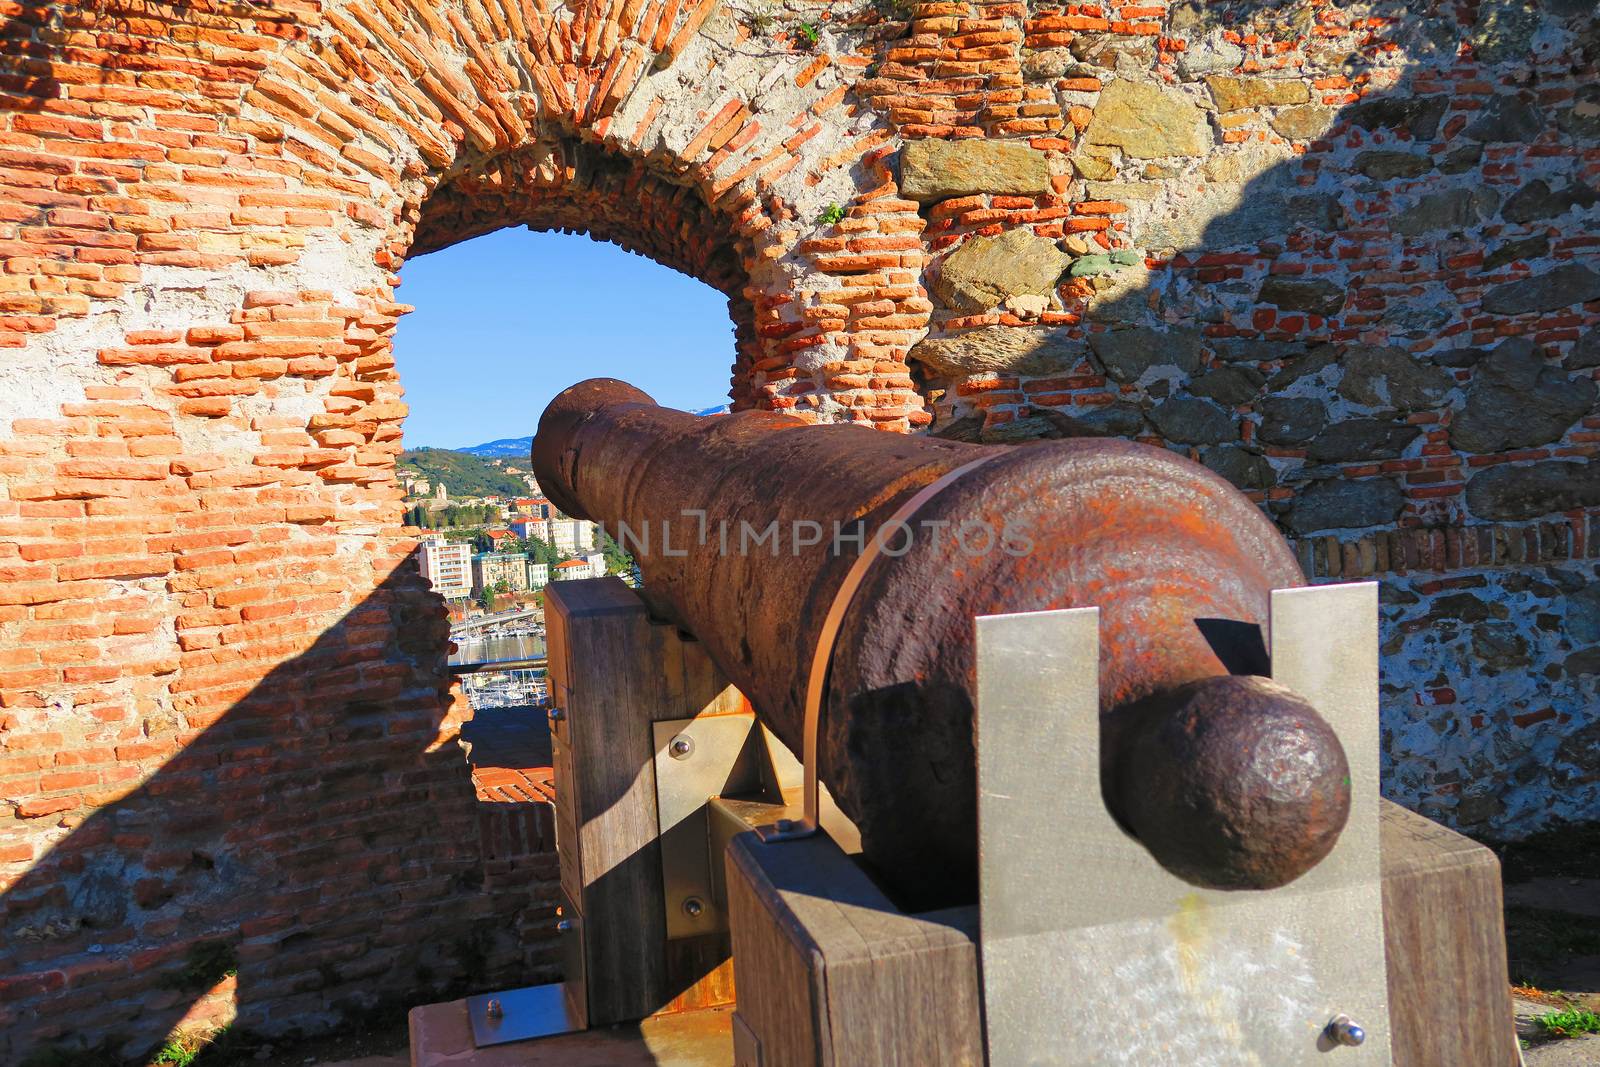 Savona,Italy,22 november 2015. View of a muzzle-loading culverin of the seventeenth century in the Priamar fortress,Savona, Liguria.